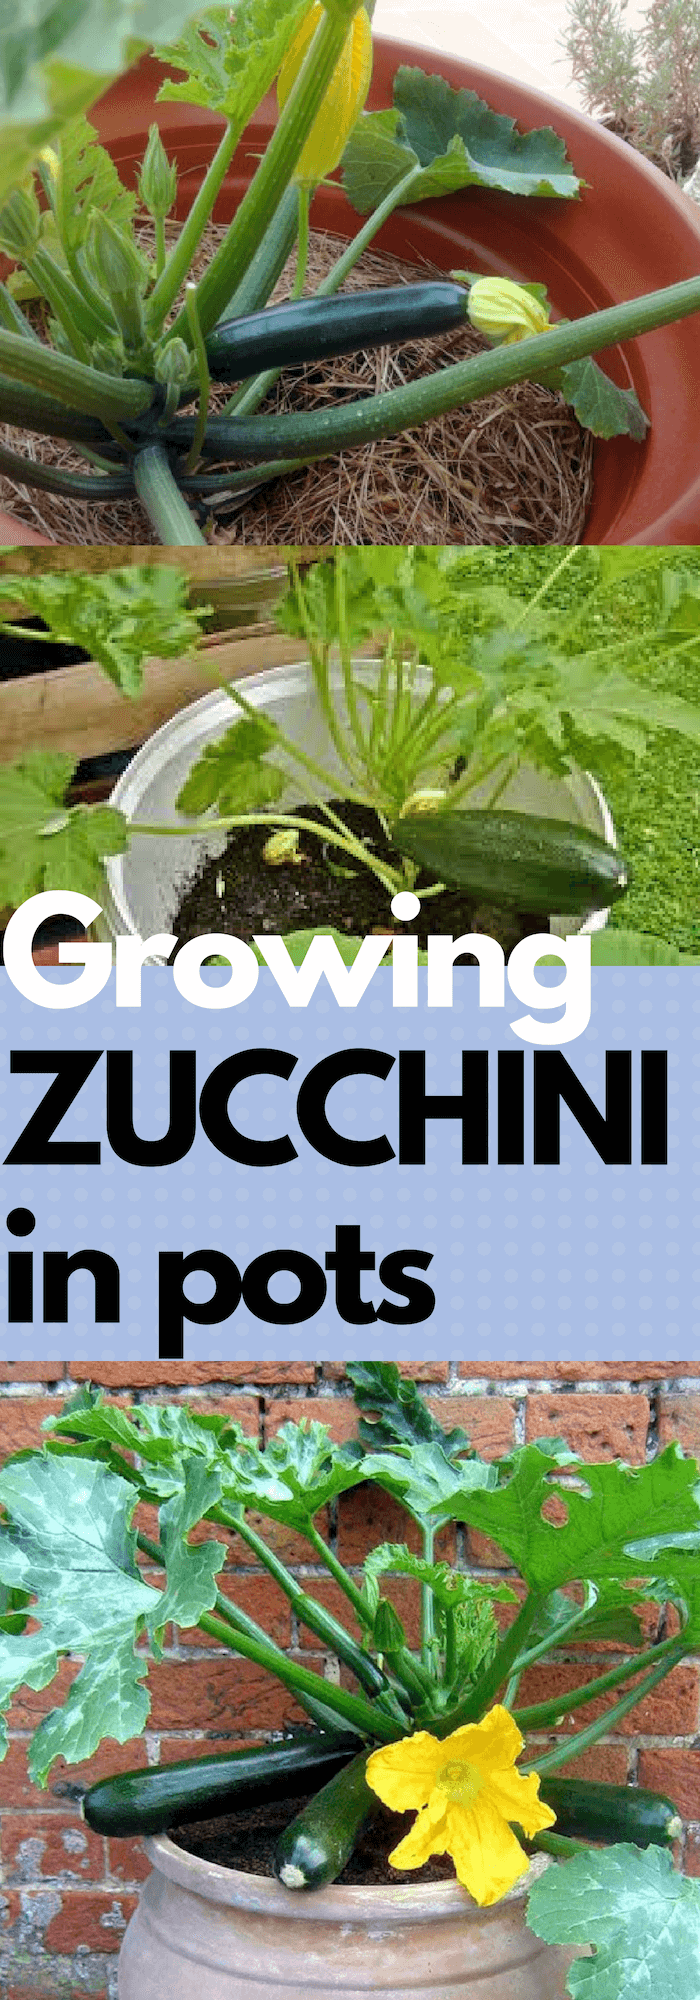 How to grow Zucchini or squashes in pots